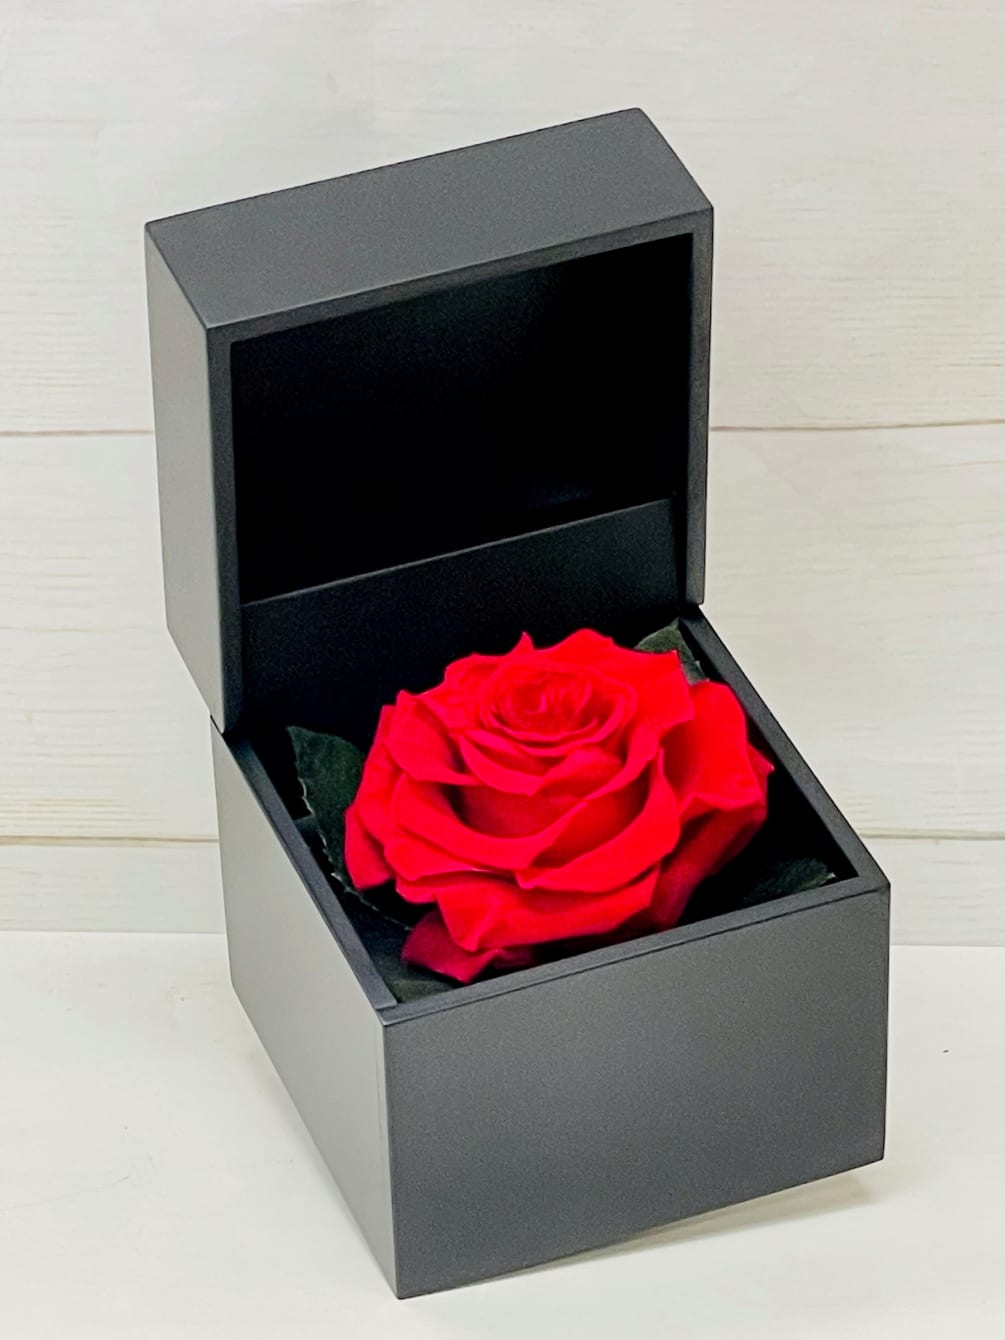 Enjoy our incredible new Preserved roses!  We are working with a